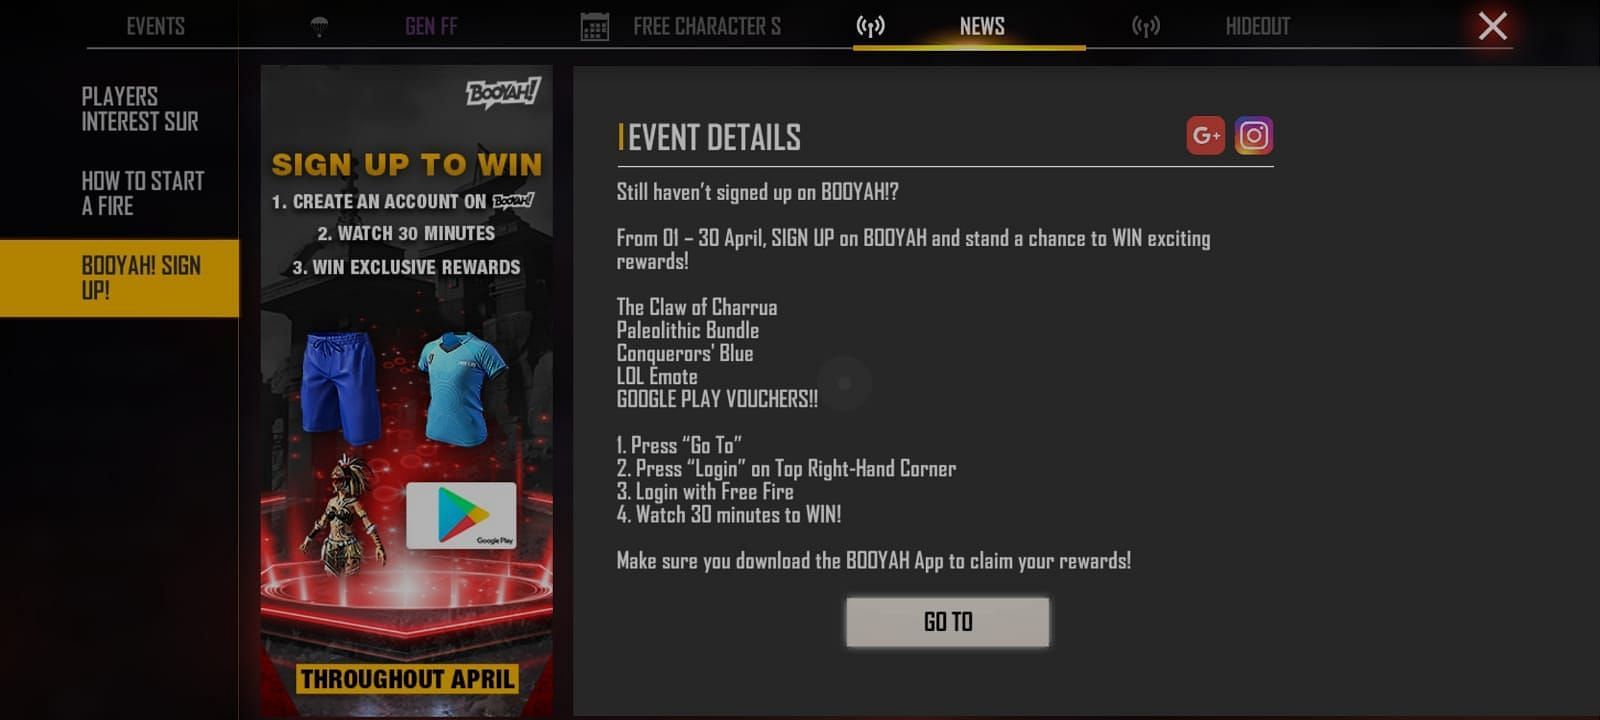 Latest Booyah! Sign Up event in Free Fire (Image via Sportskeeda)